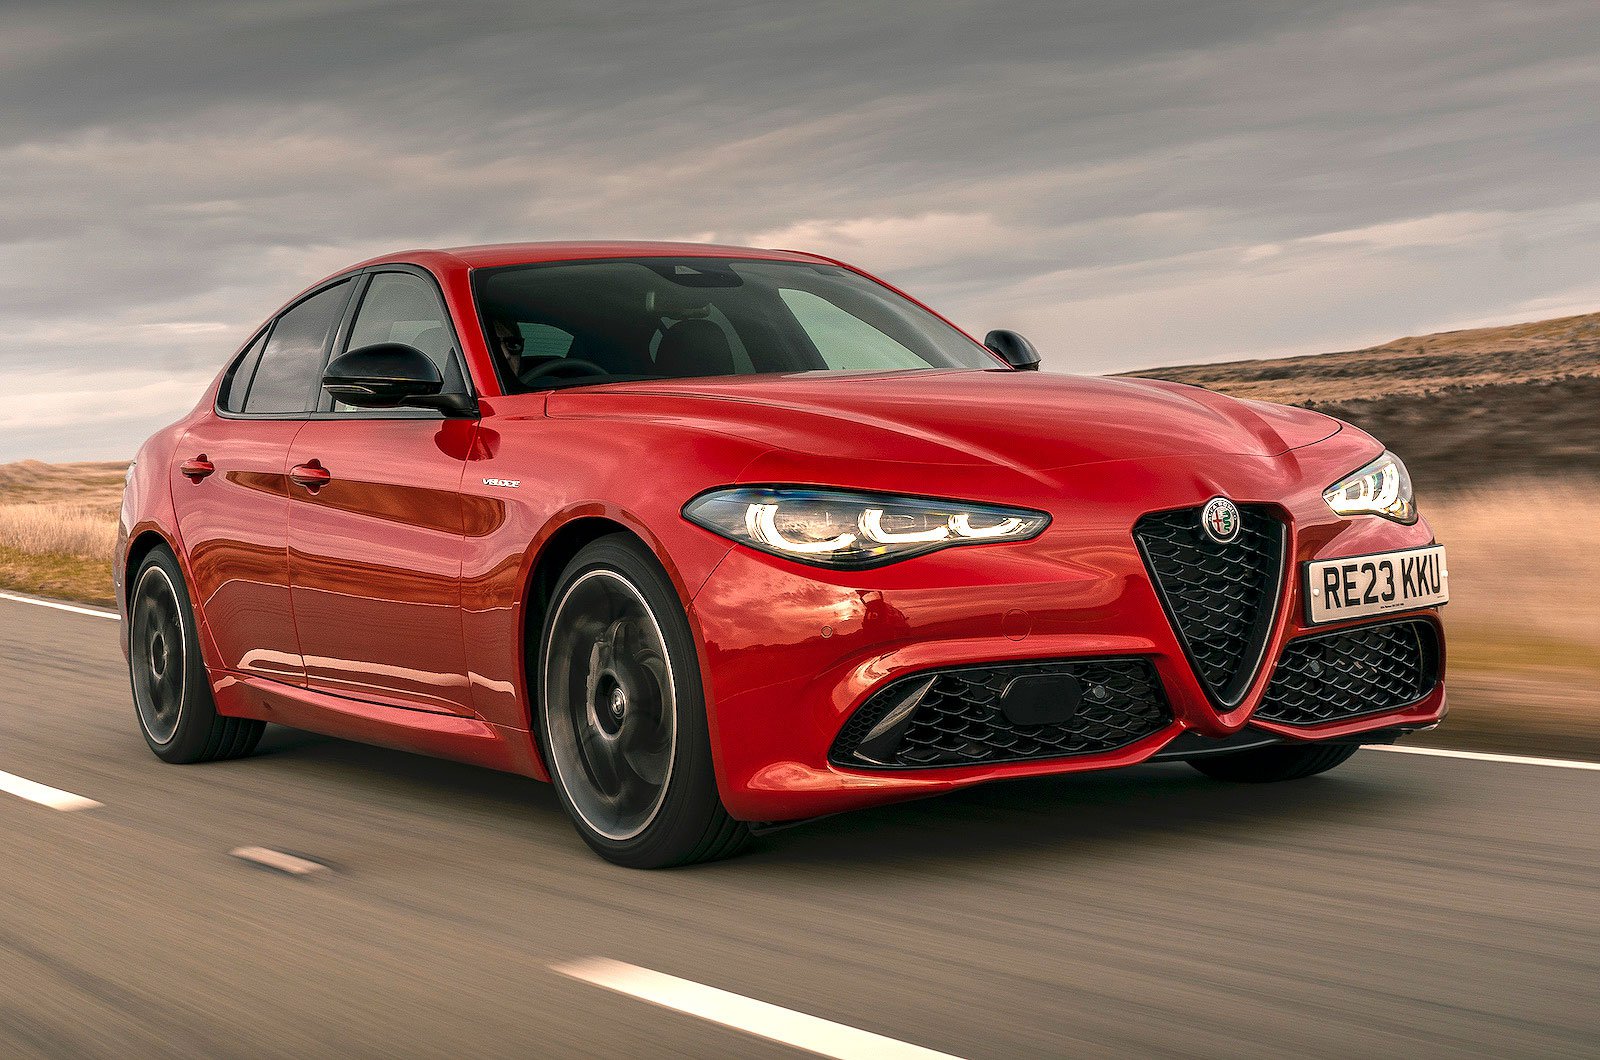 <p>Few executive cars turn heads as well as the Giulia. Not only is it stylish, but it's also great to drive with genuinely sporty handling and smooth engines (especially with this 2.0-litre turbocharged petrol engine). However, the interior is starting to feel its age and rivals are more practical.</p>  <p><strong>Model</strong> Giulia | <strong>Version</strong> 2.0 Turbo Veloce | <strong>Target PCP</strong> £237 | <strong>Target Price</strong> £45,790 | <strong>The deal</strong> Four years' PCP finance with 2.9% APR and £750 finance contribution. Limit of 8000 miles per year | <strong>Star rating</strong> 4</p>